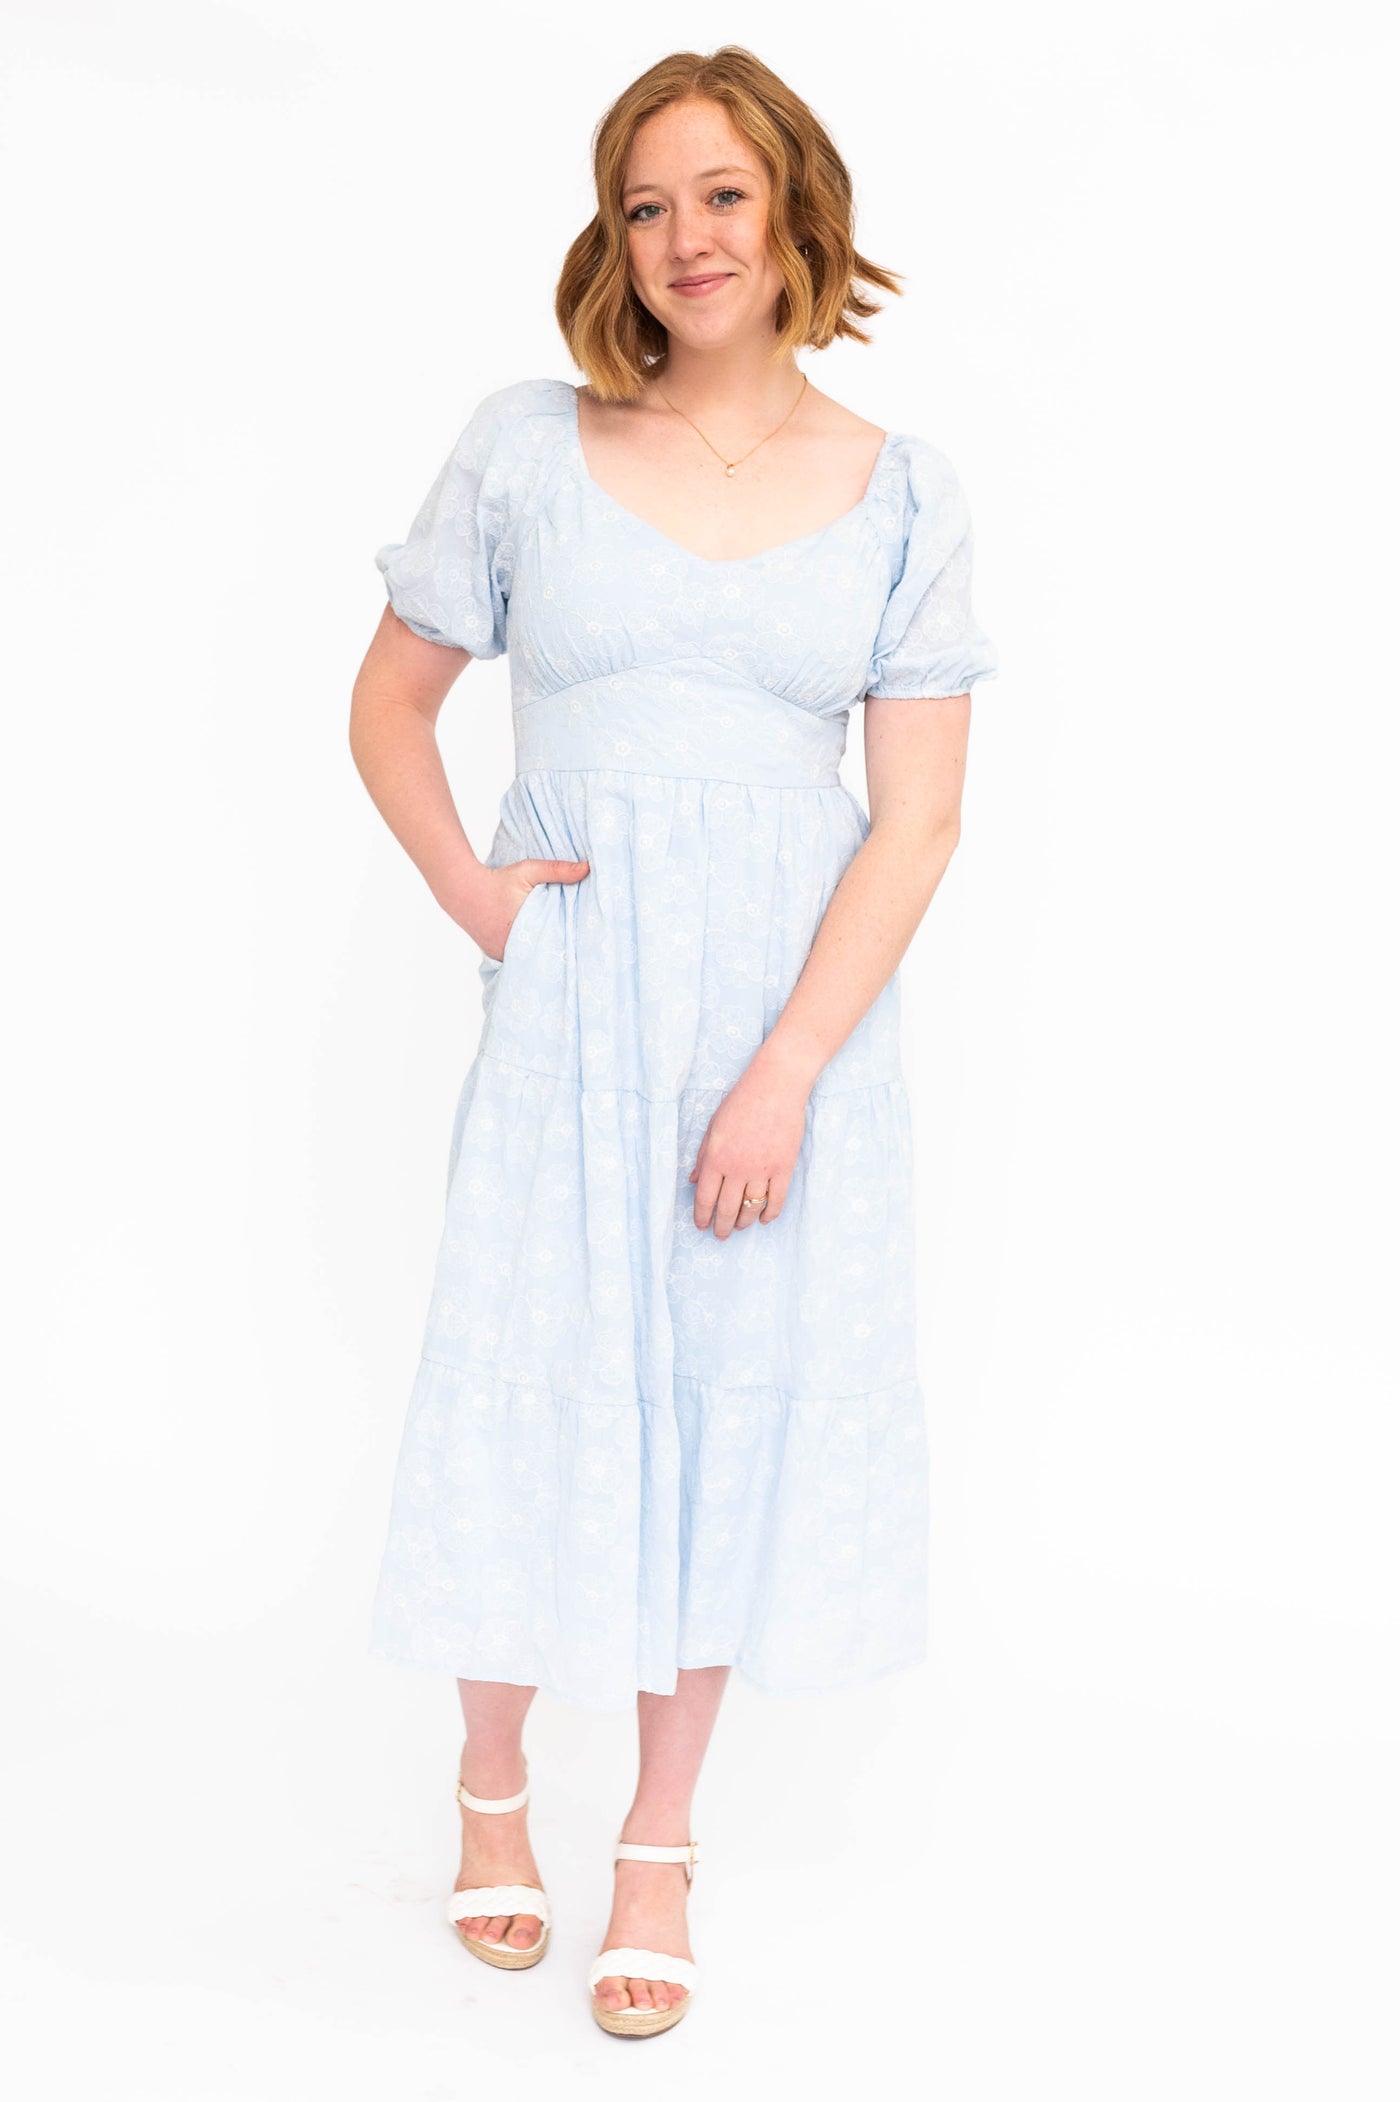 Light blue dress with sweat heart bodice and pocket